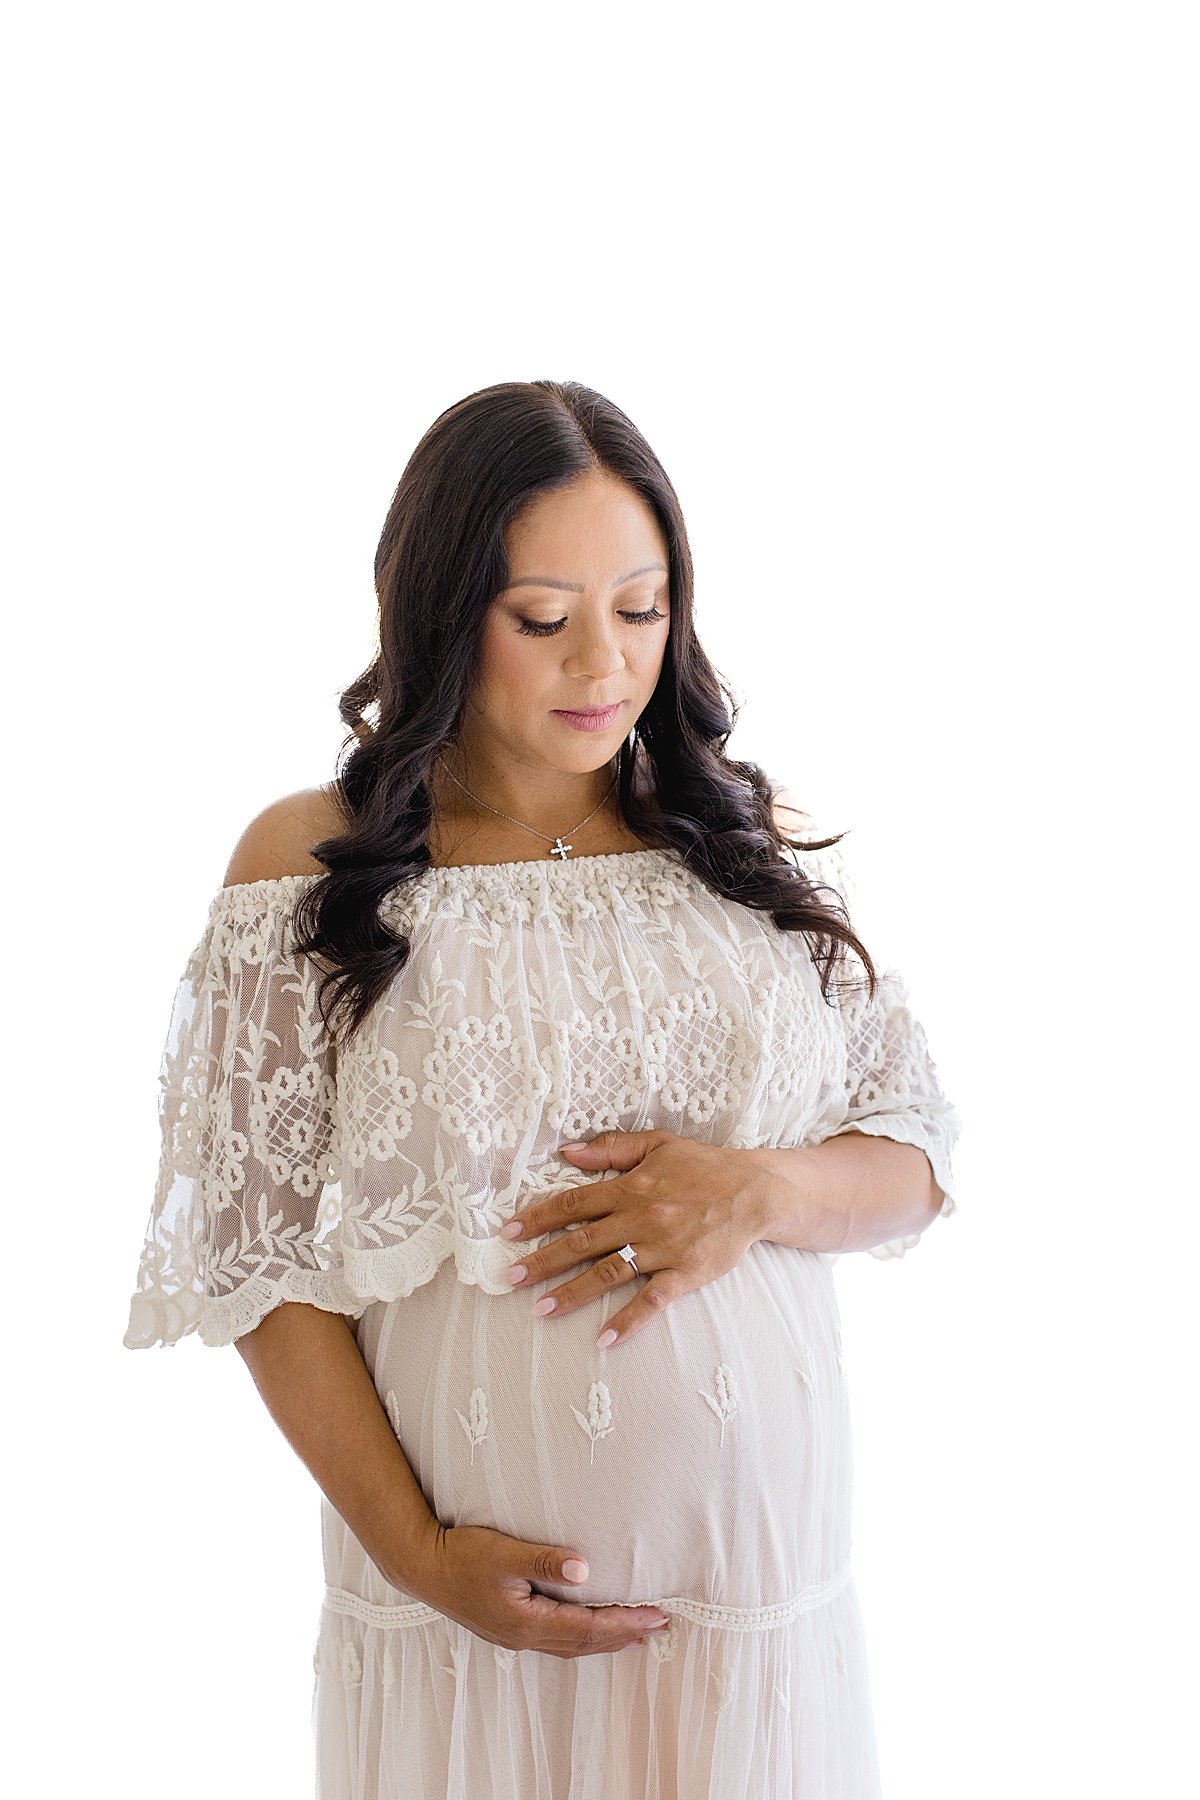 Mom looking at pregnant belly during studio session in Newport Beach | Ambre Williams Photography